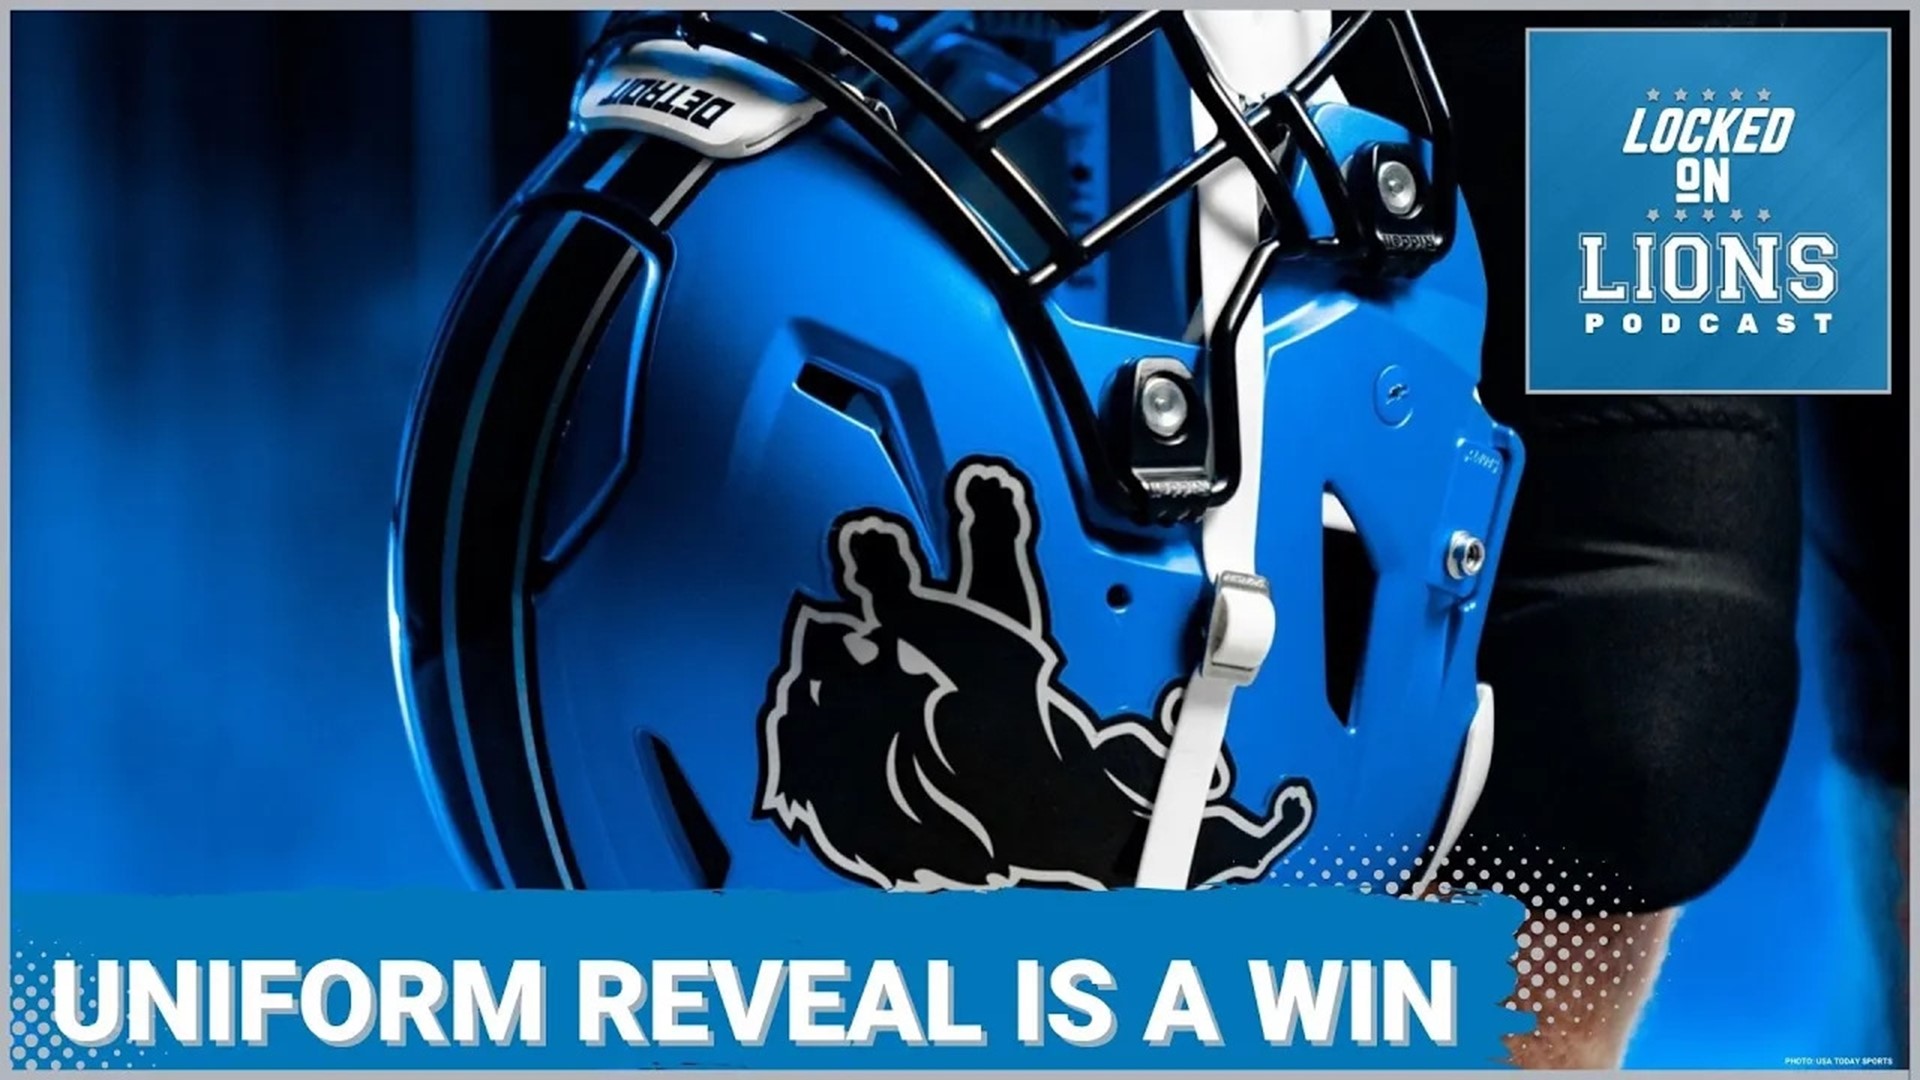 The Detroit Lions have unveiled their new uniforms and most of the fans are very excited. The team is bringing back the black uniforms, at Dan Campbell's request.